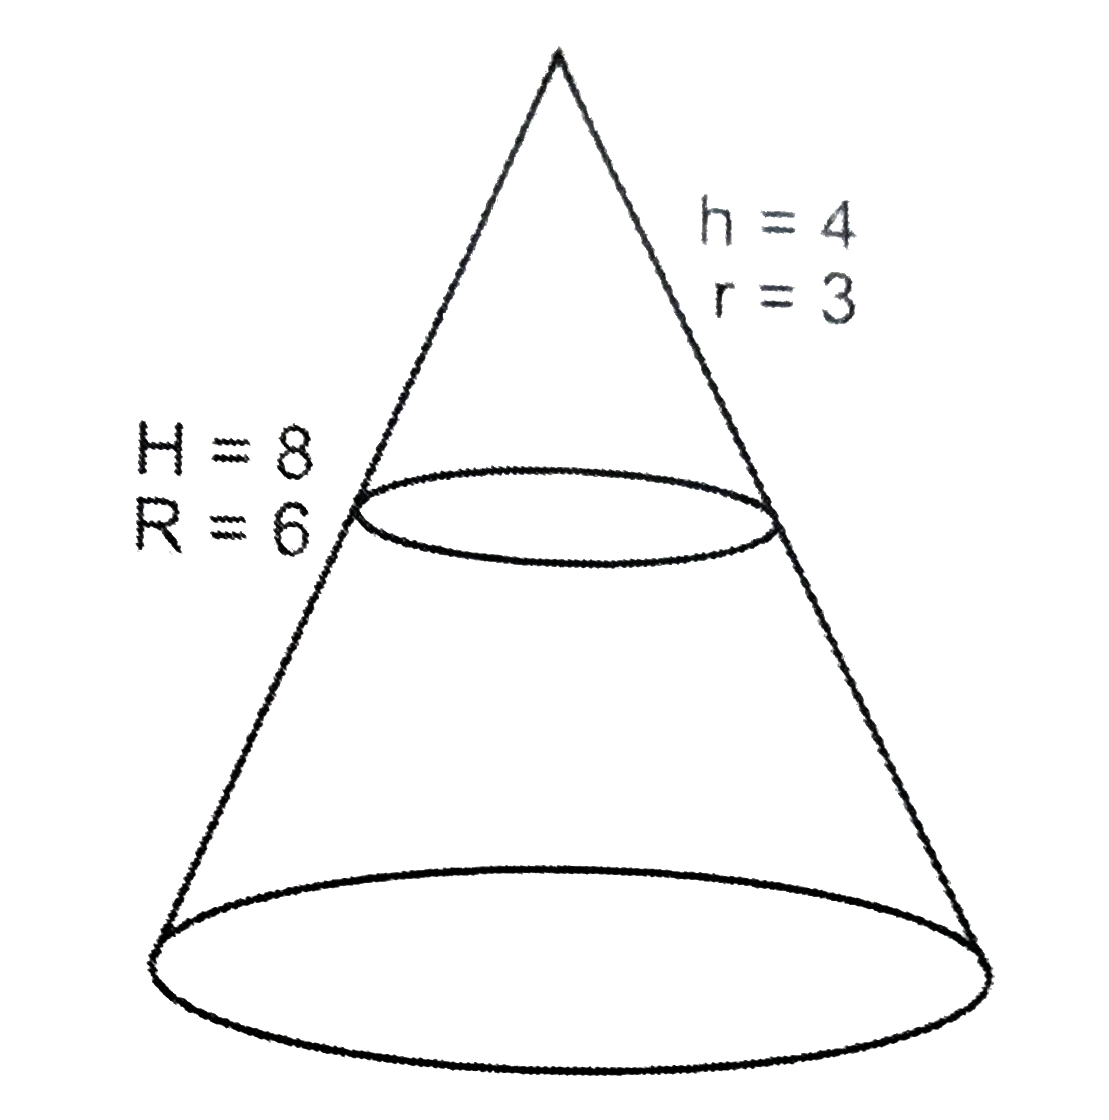 A right circular cone, with radius and height  8 and 6 respectively , is cut parallel at the middle of the height to get a smaller cone and a frustum. By what percentage, to the nearest integer, is the combined total surface area of the smaller cone less than of the frustum?